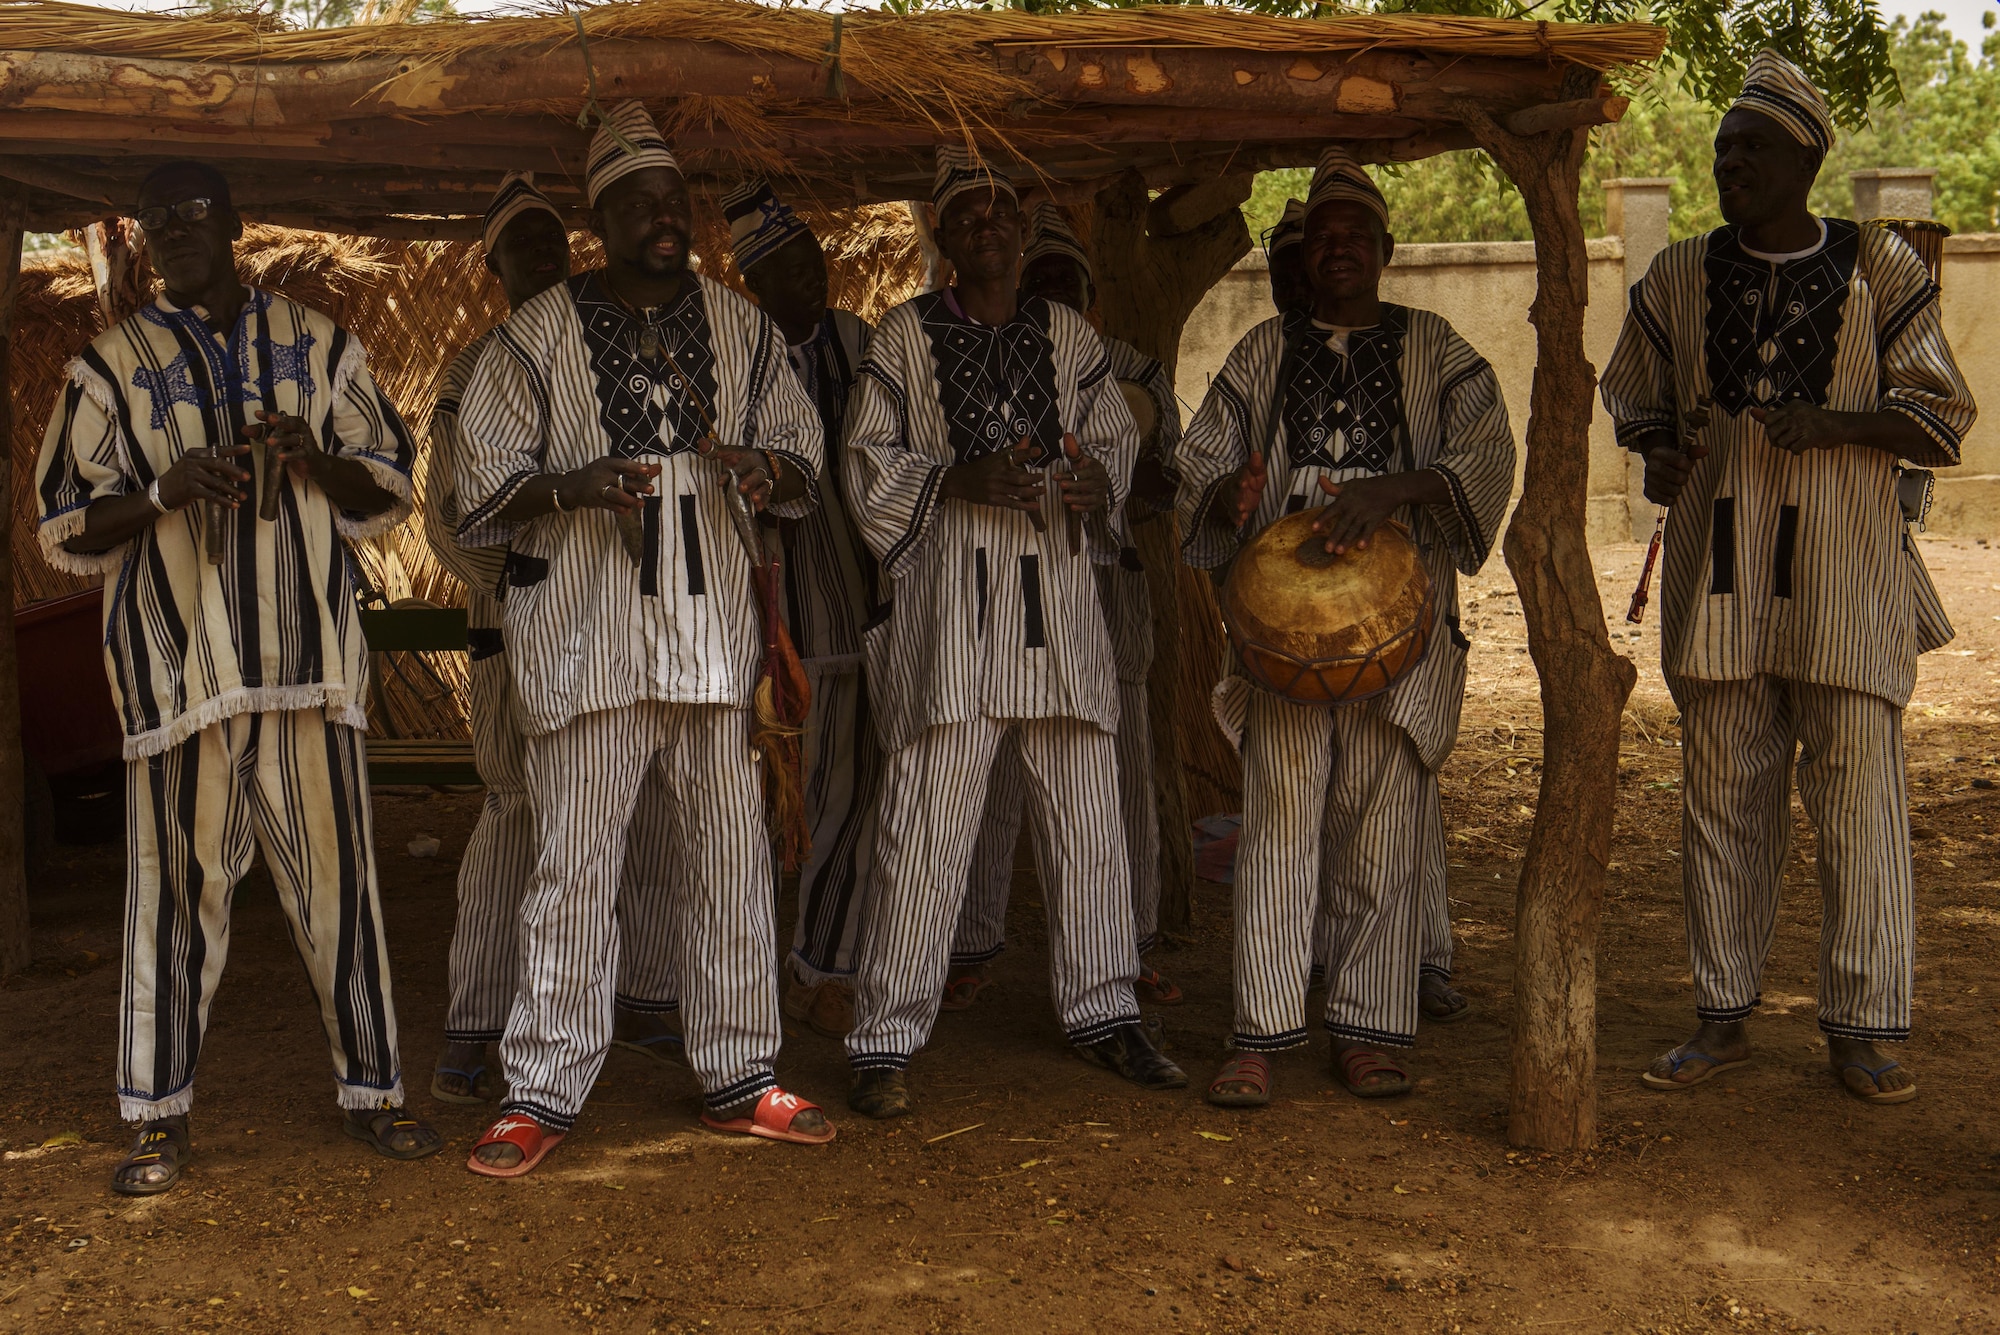 A band plays while welcoming participants of the African Partnership Flight into Titinga Frédéric Pacéré home during a cultural tour near Ouagadougou, Burkina Faso, April 17, 2017. APF in Burkina Faso hosted participants from Chad, Mali, Mauritania, Niger, Cote d’Ivoire and Morocco to help strengthen relationships and share best practices. (U.S. Air Force photo by Staff Sgt. Jonathan Snyder)